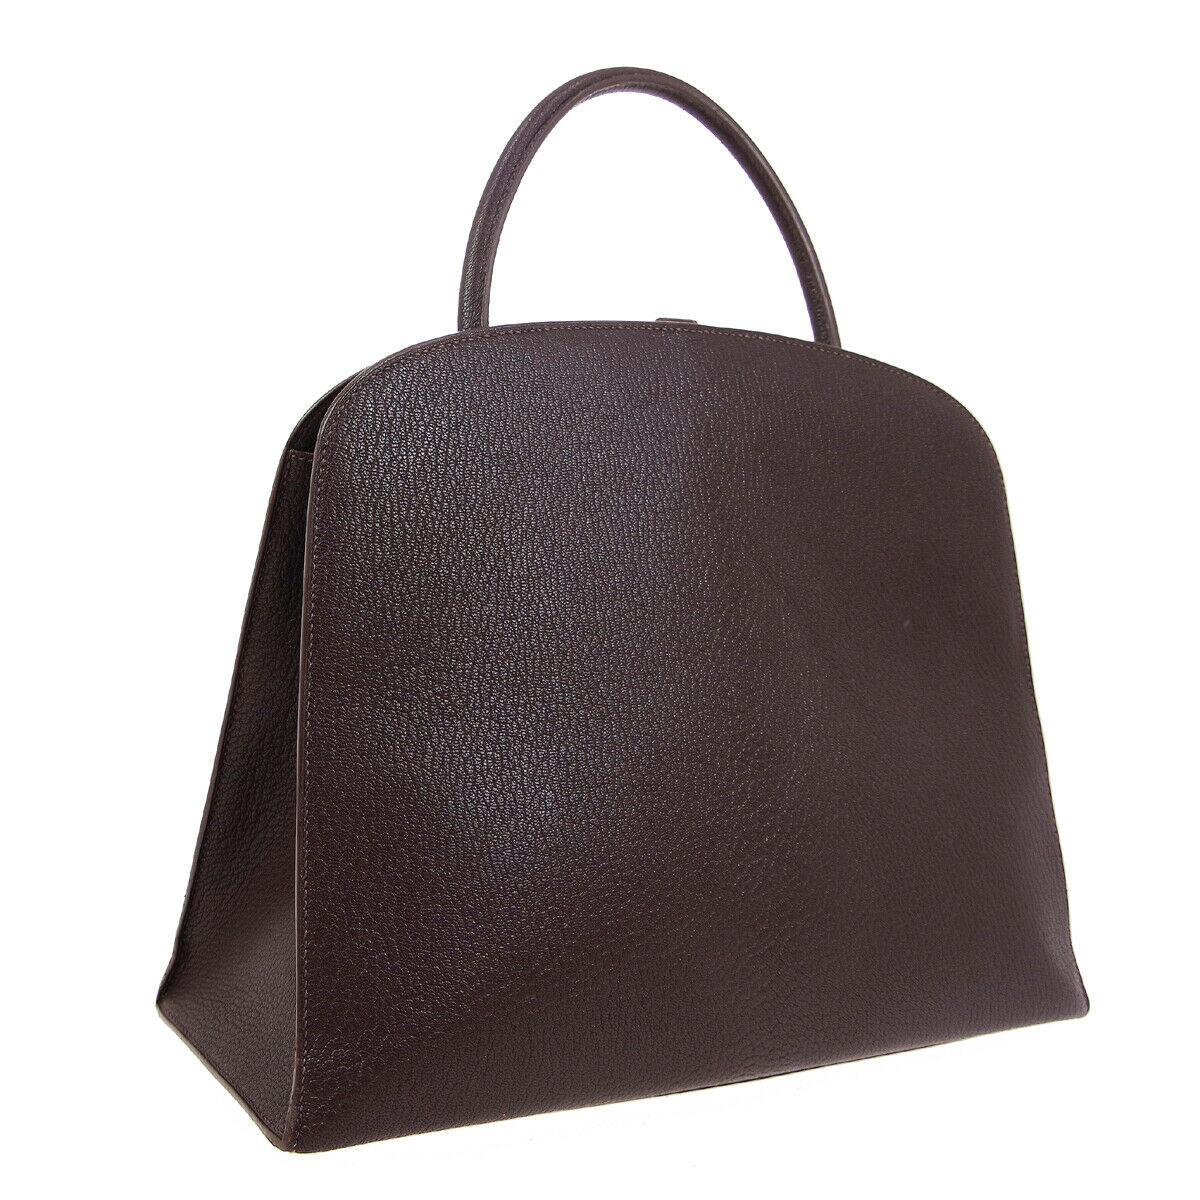 chocolate brown leather tote